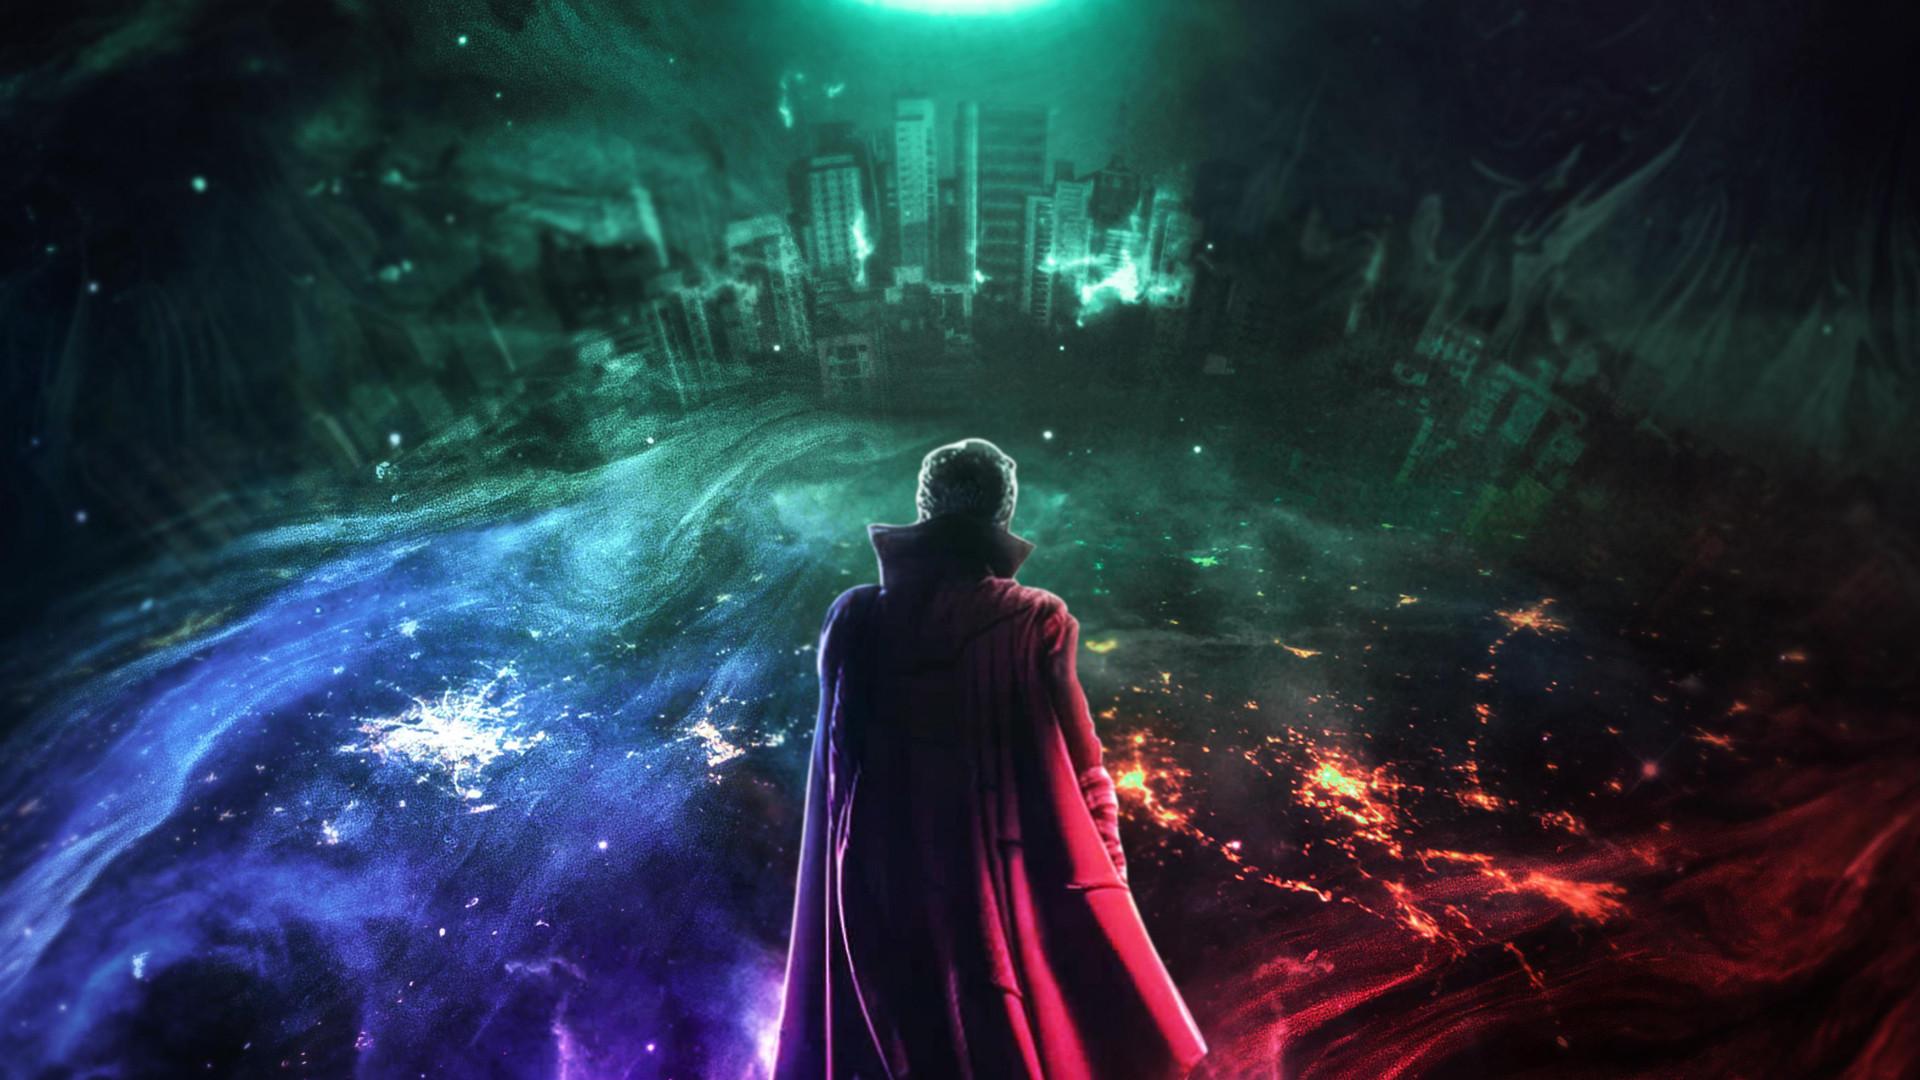 Doctor Strange in the Multiverse of M for windows download free